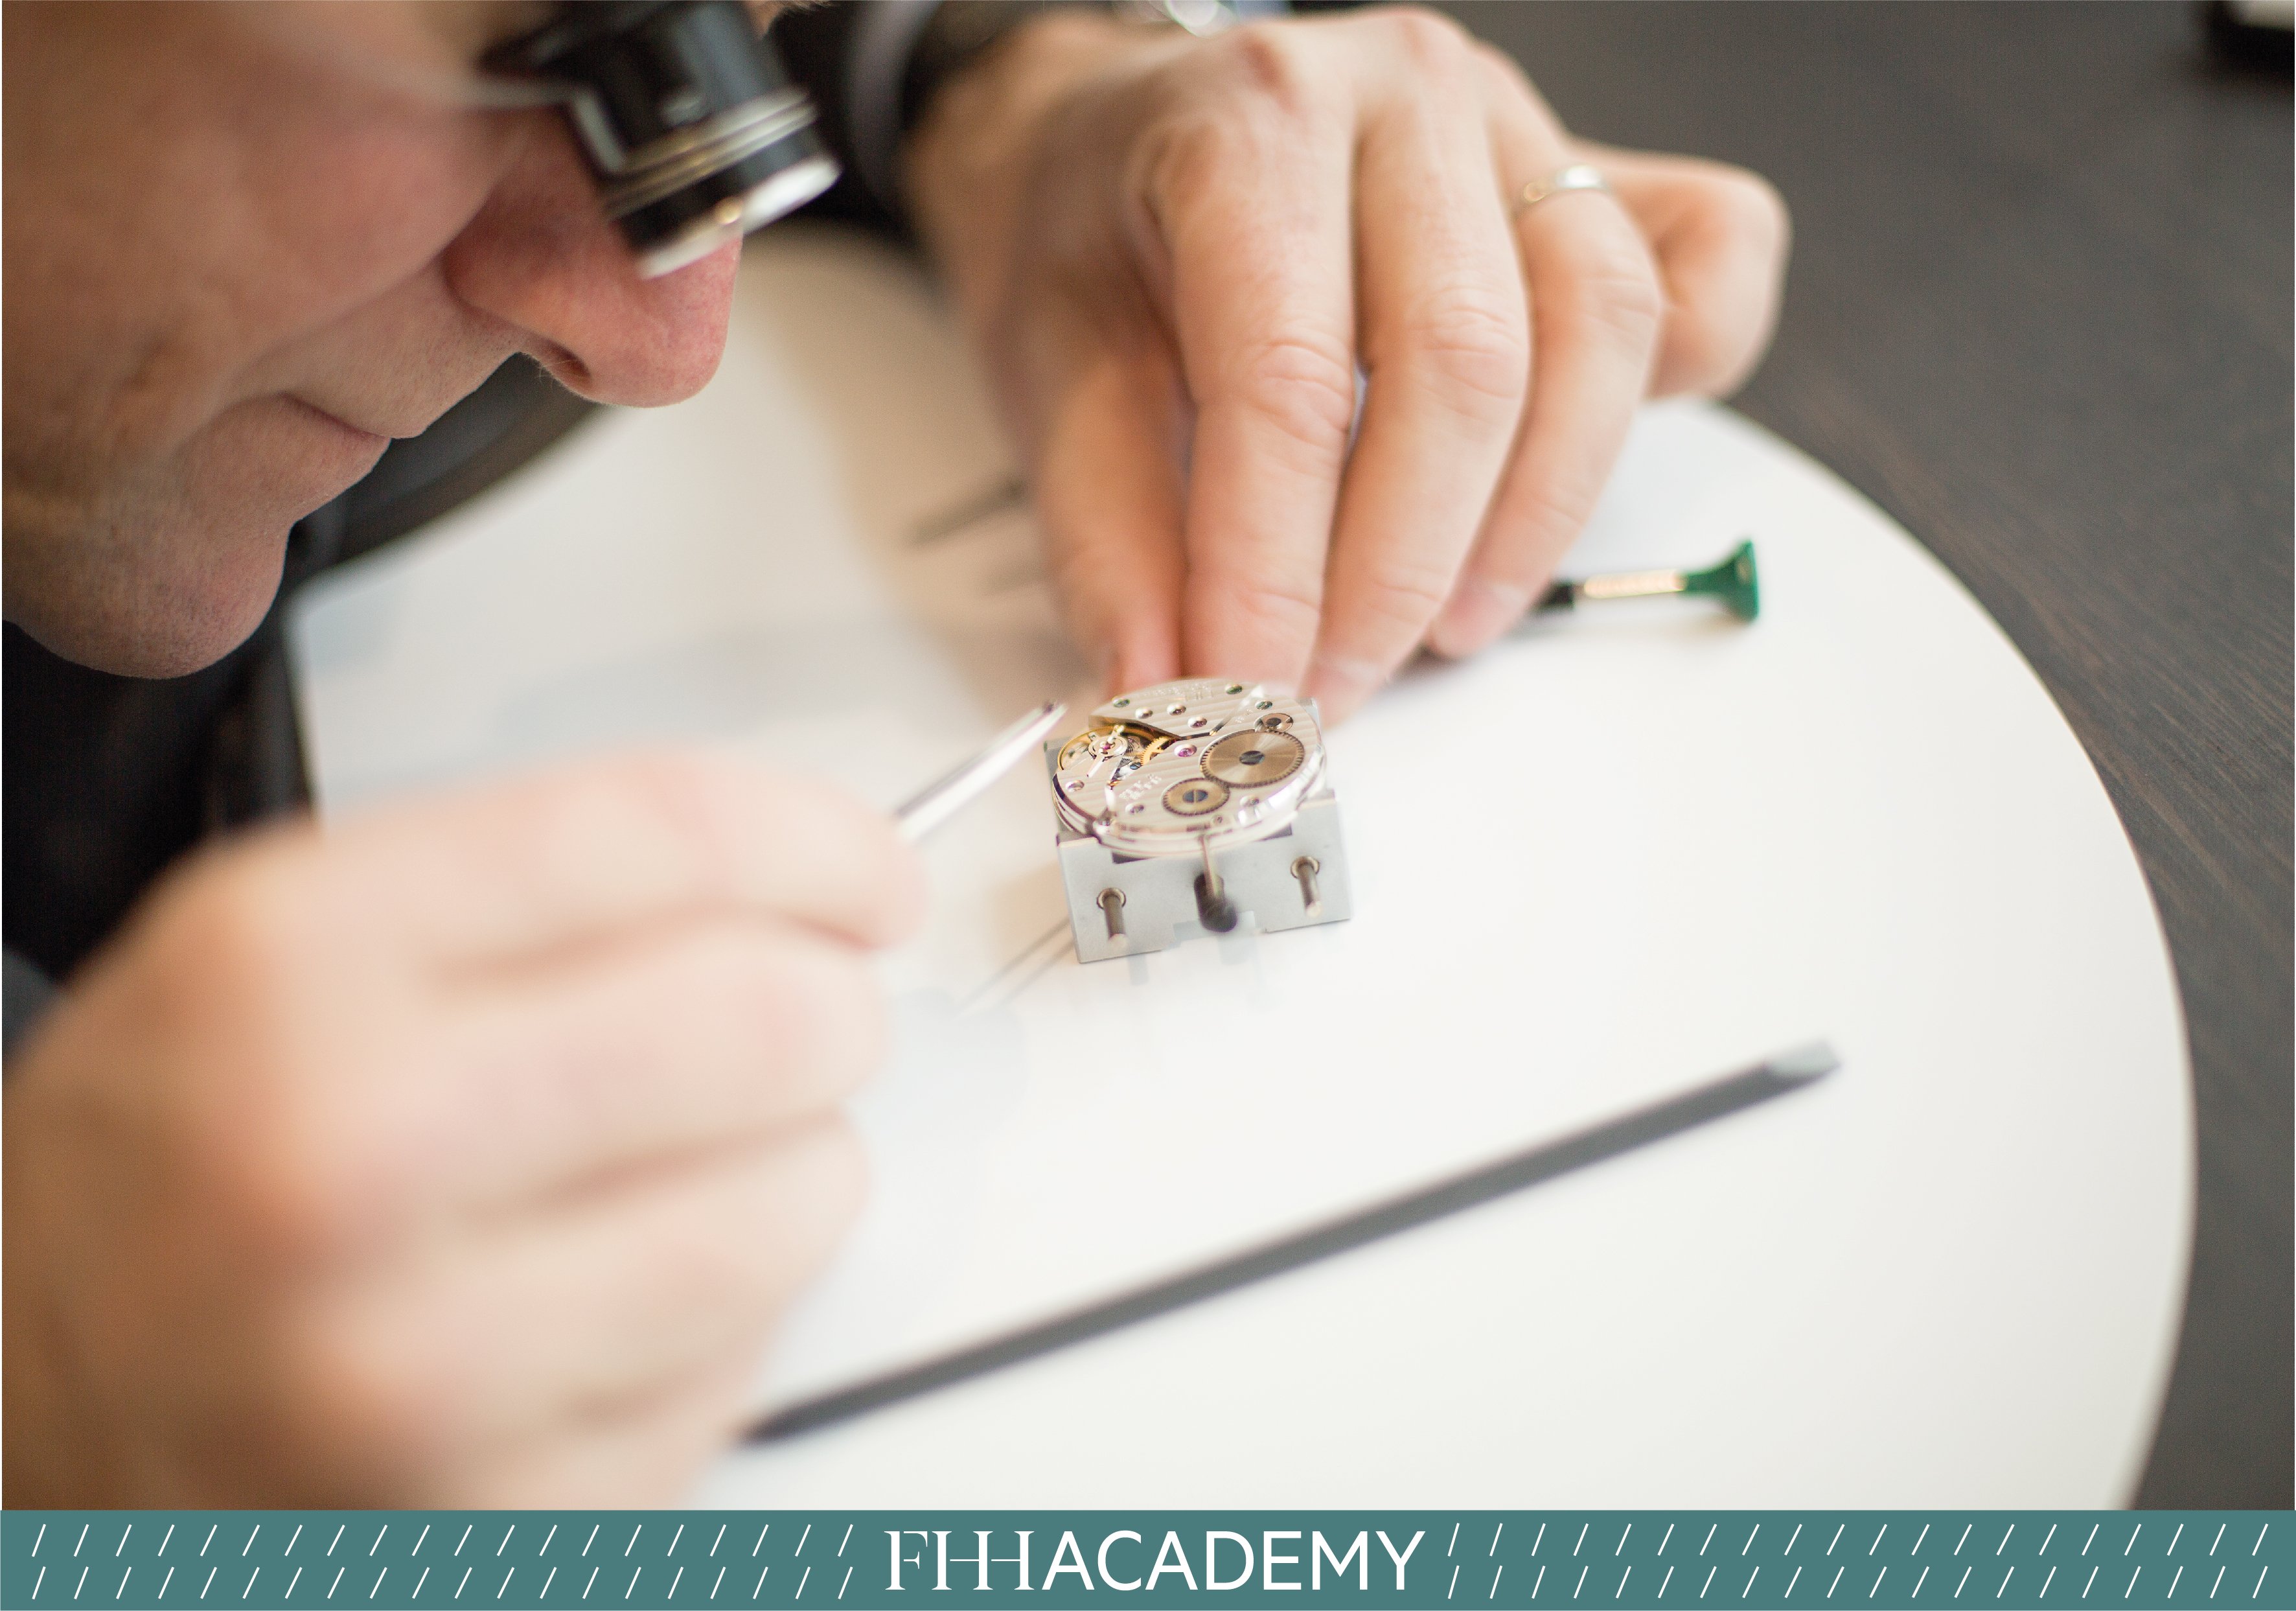 Future challenges of the fine watchmaking industry